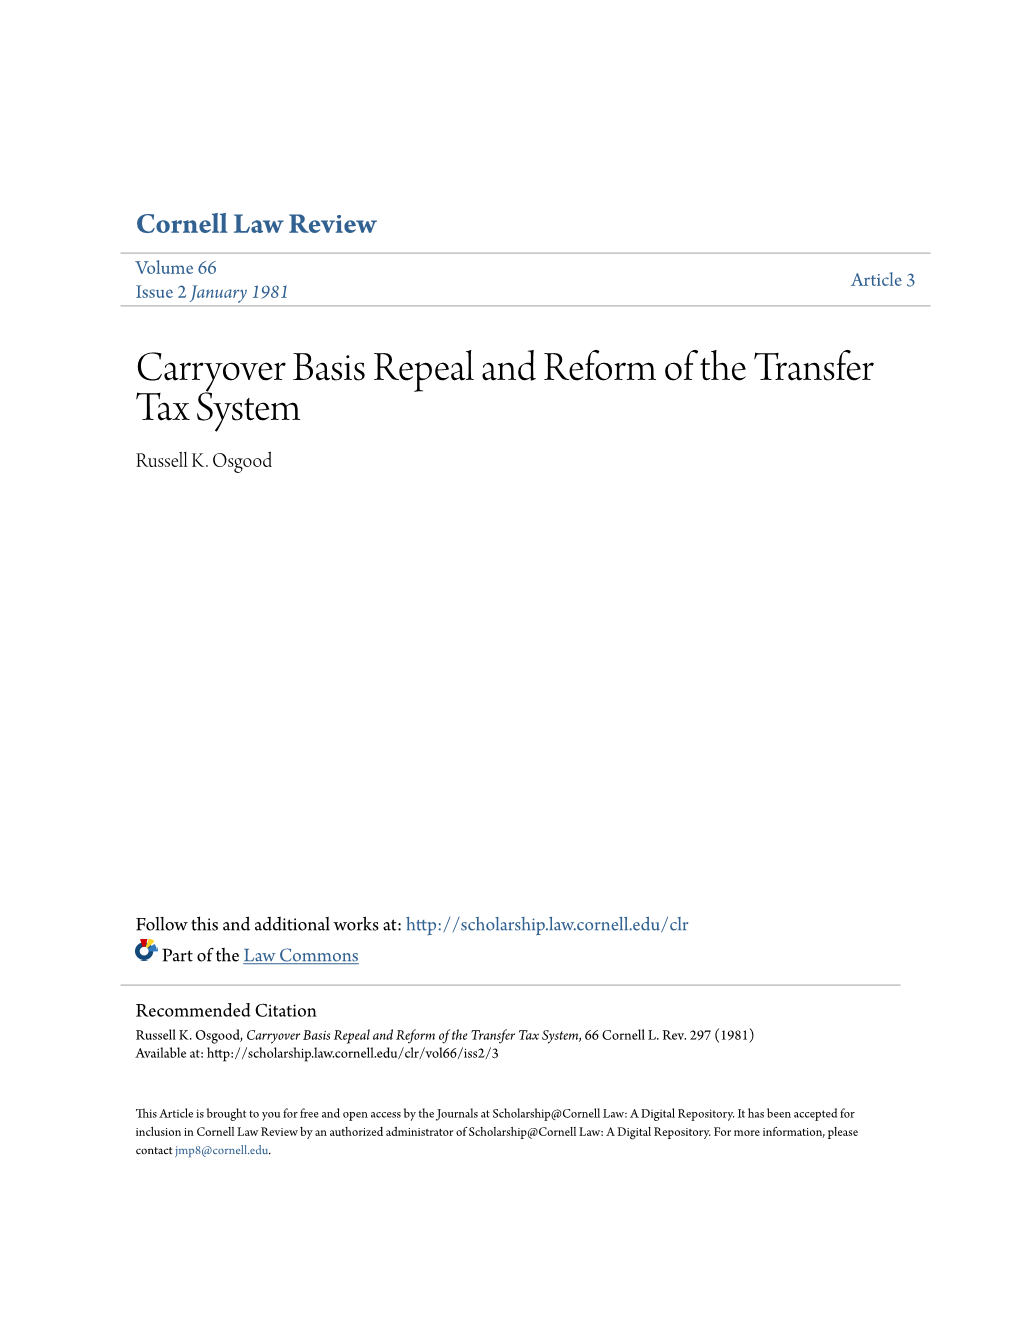 Carryover Basis Repeal and Reform of the Transfer Tax System Russell K